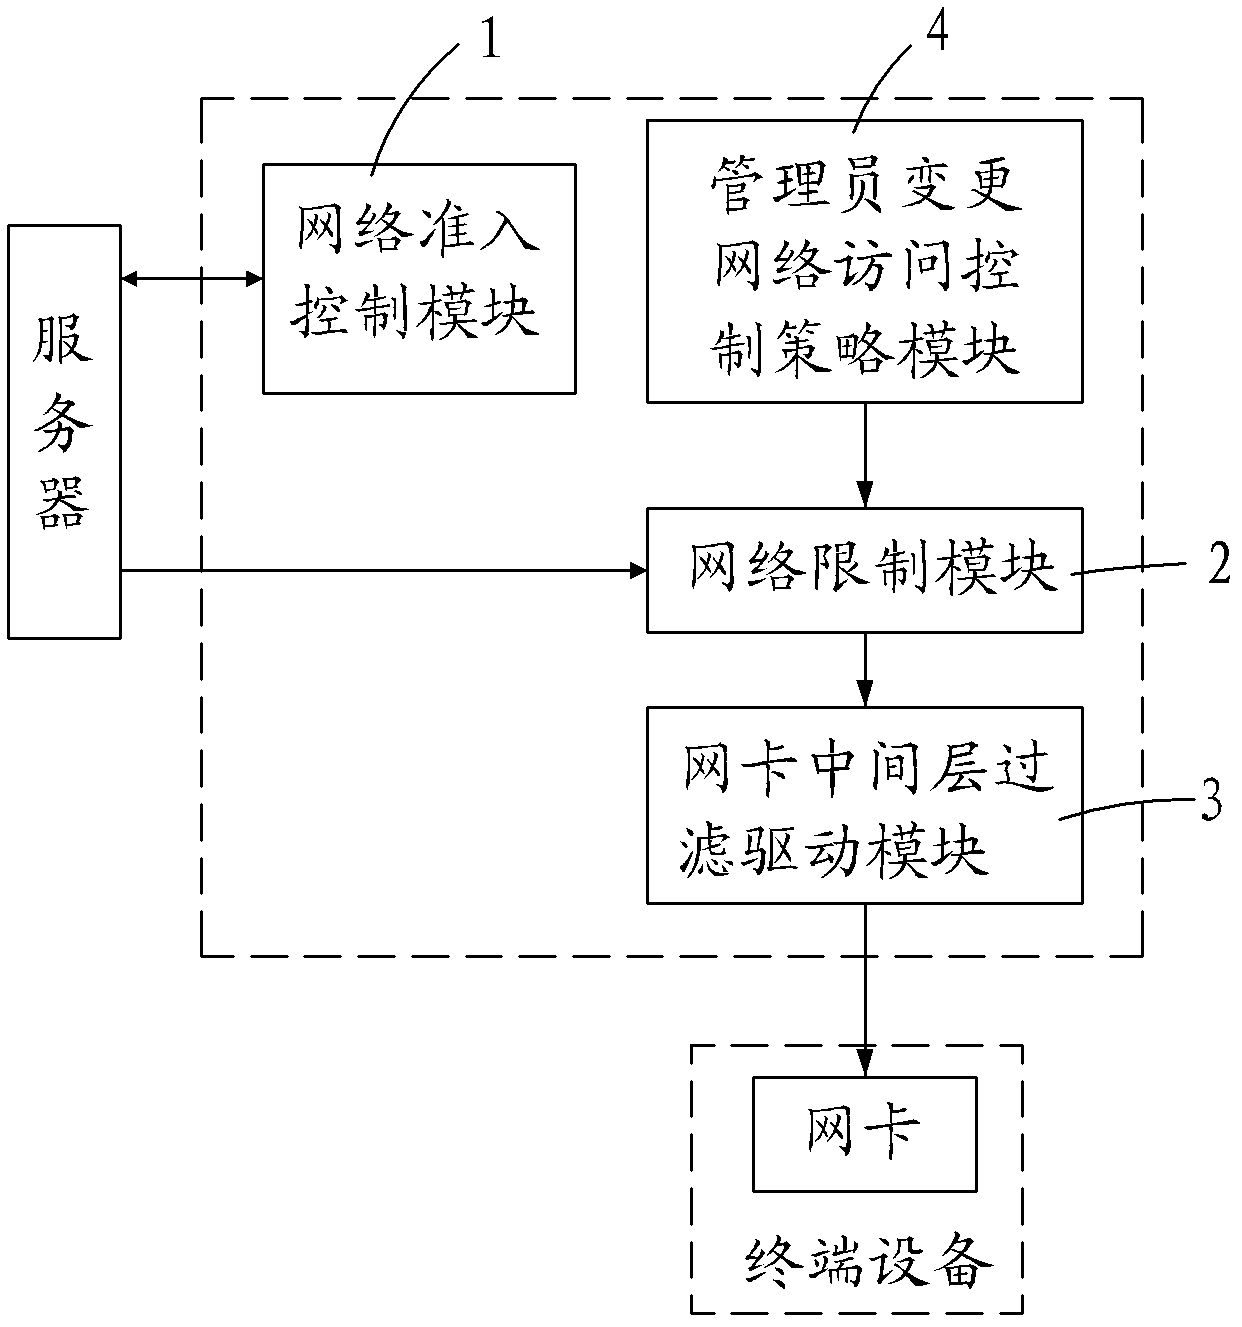 Terminal-based network access control system